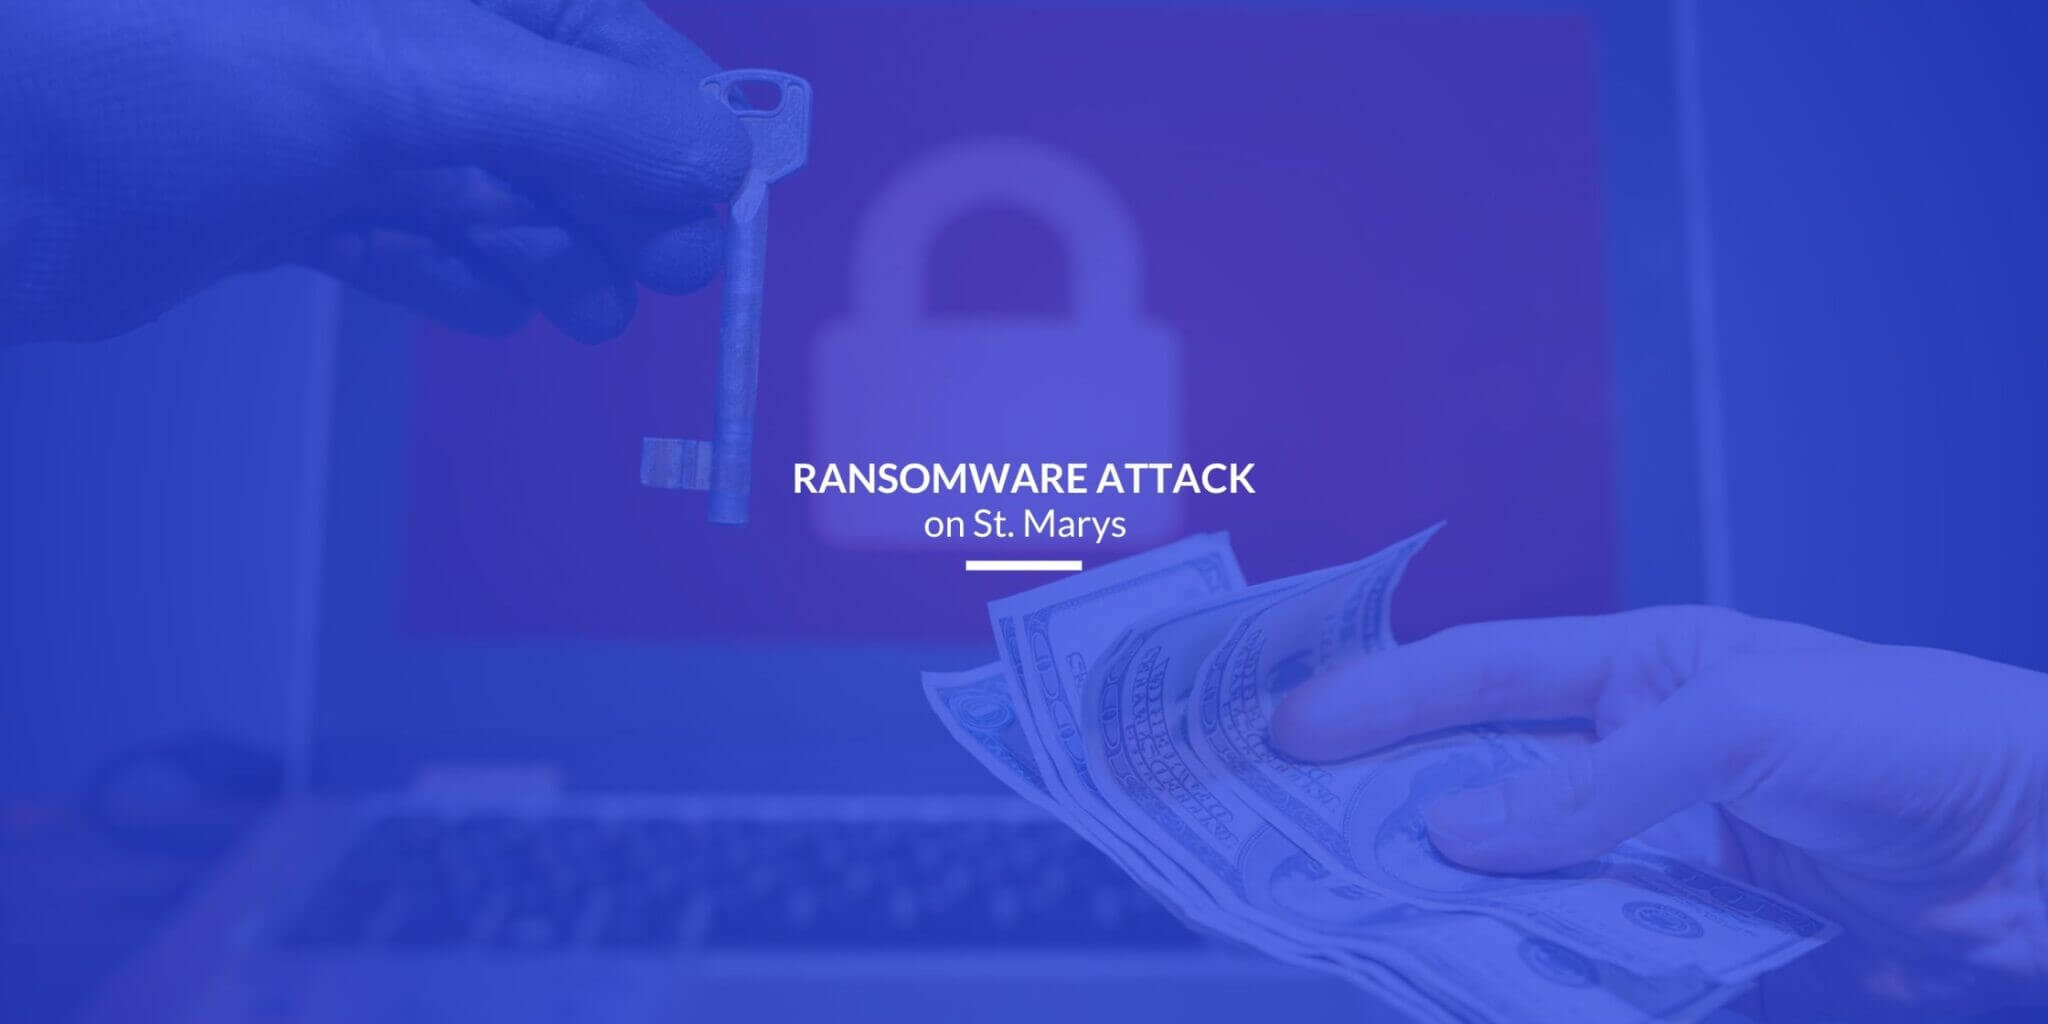 You are currently viewing A Canadian Town of St. Marys has been targeted by a Global Ransomware Group